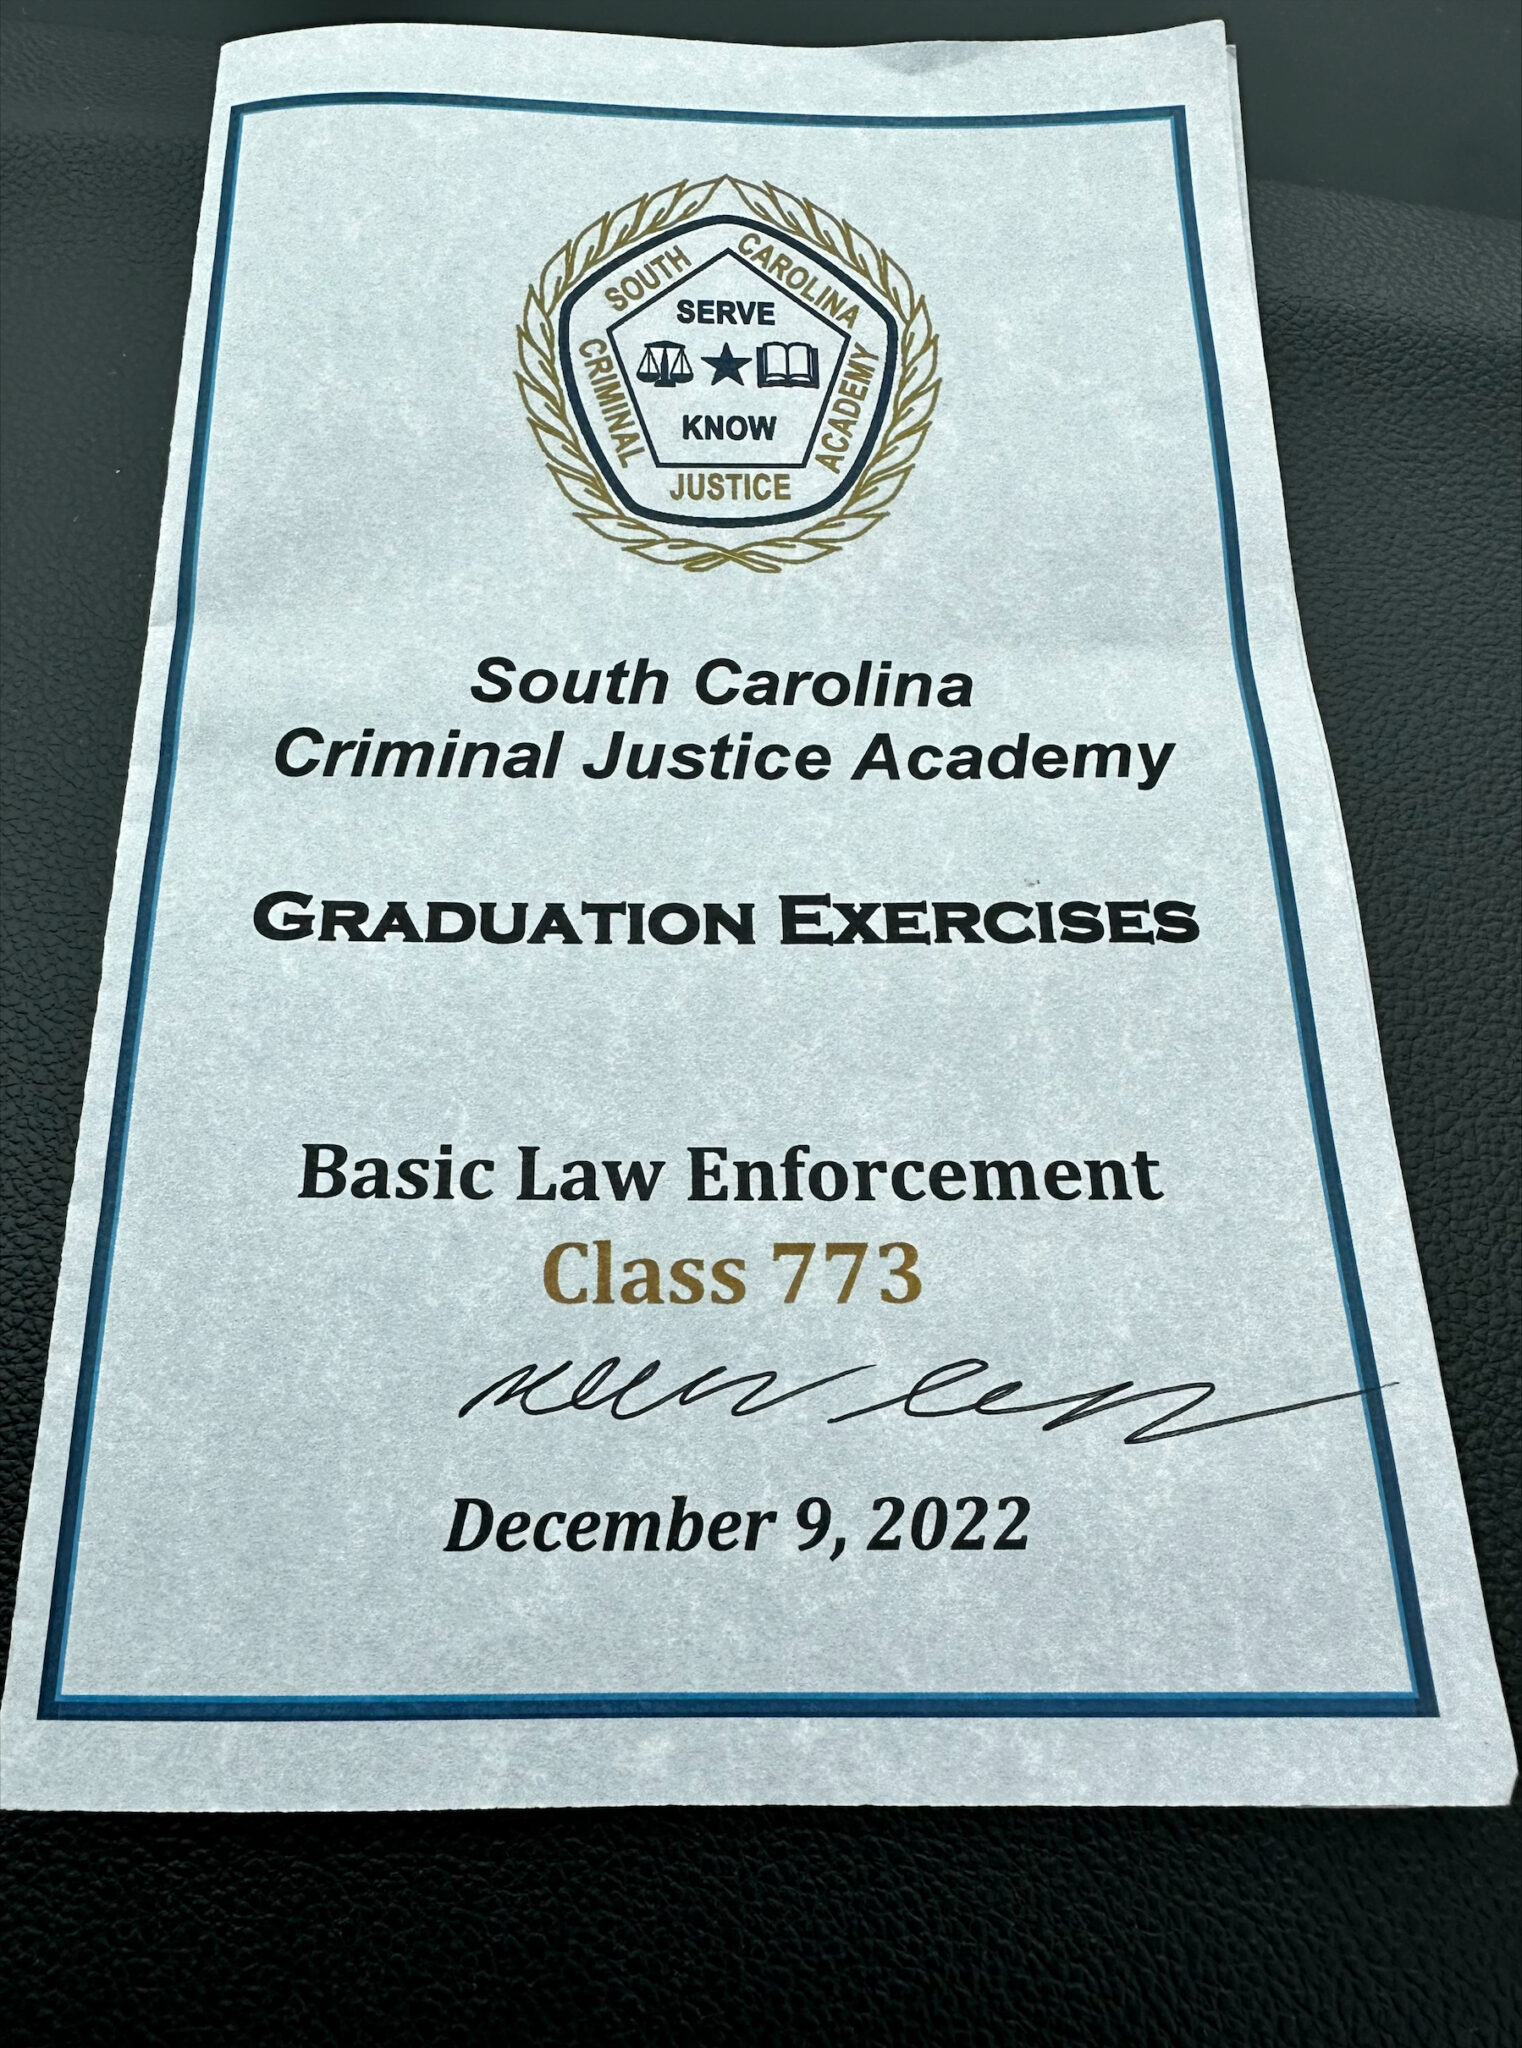 NCPD Officer Kellogg graduates from Criminal Justice Academy City of